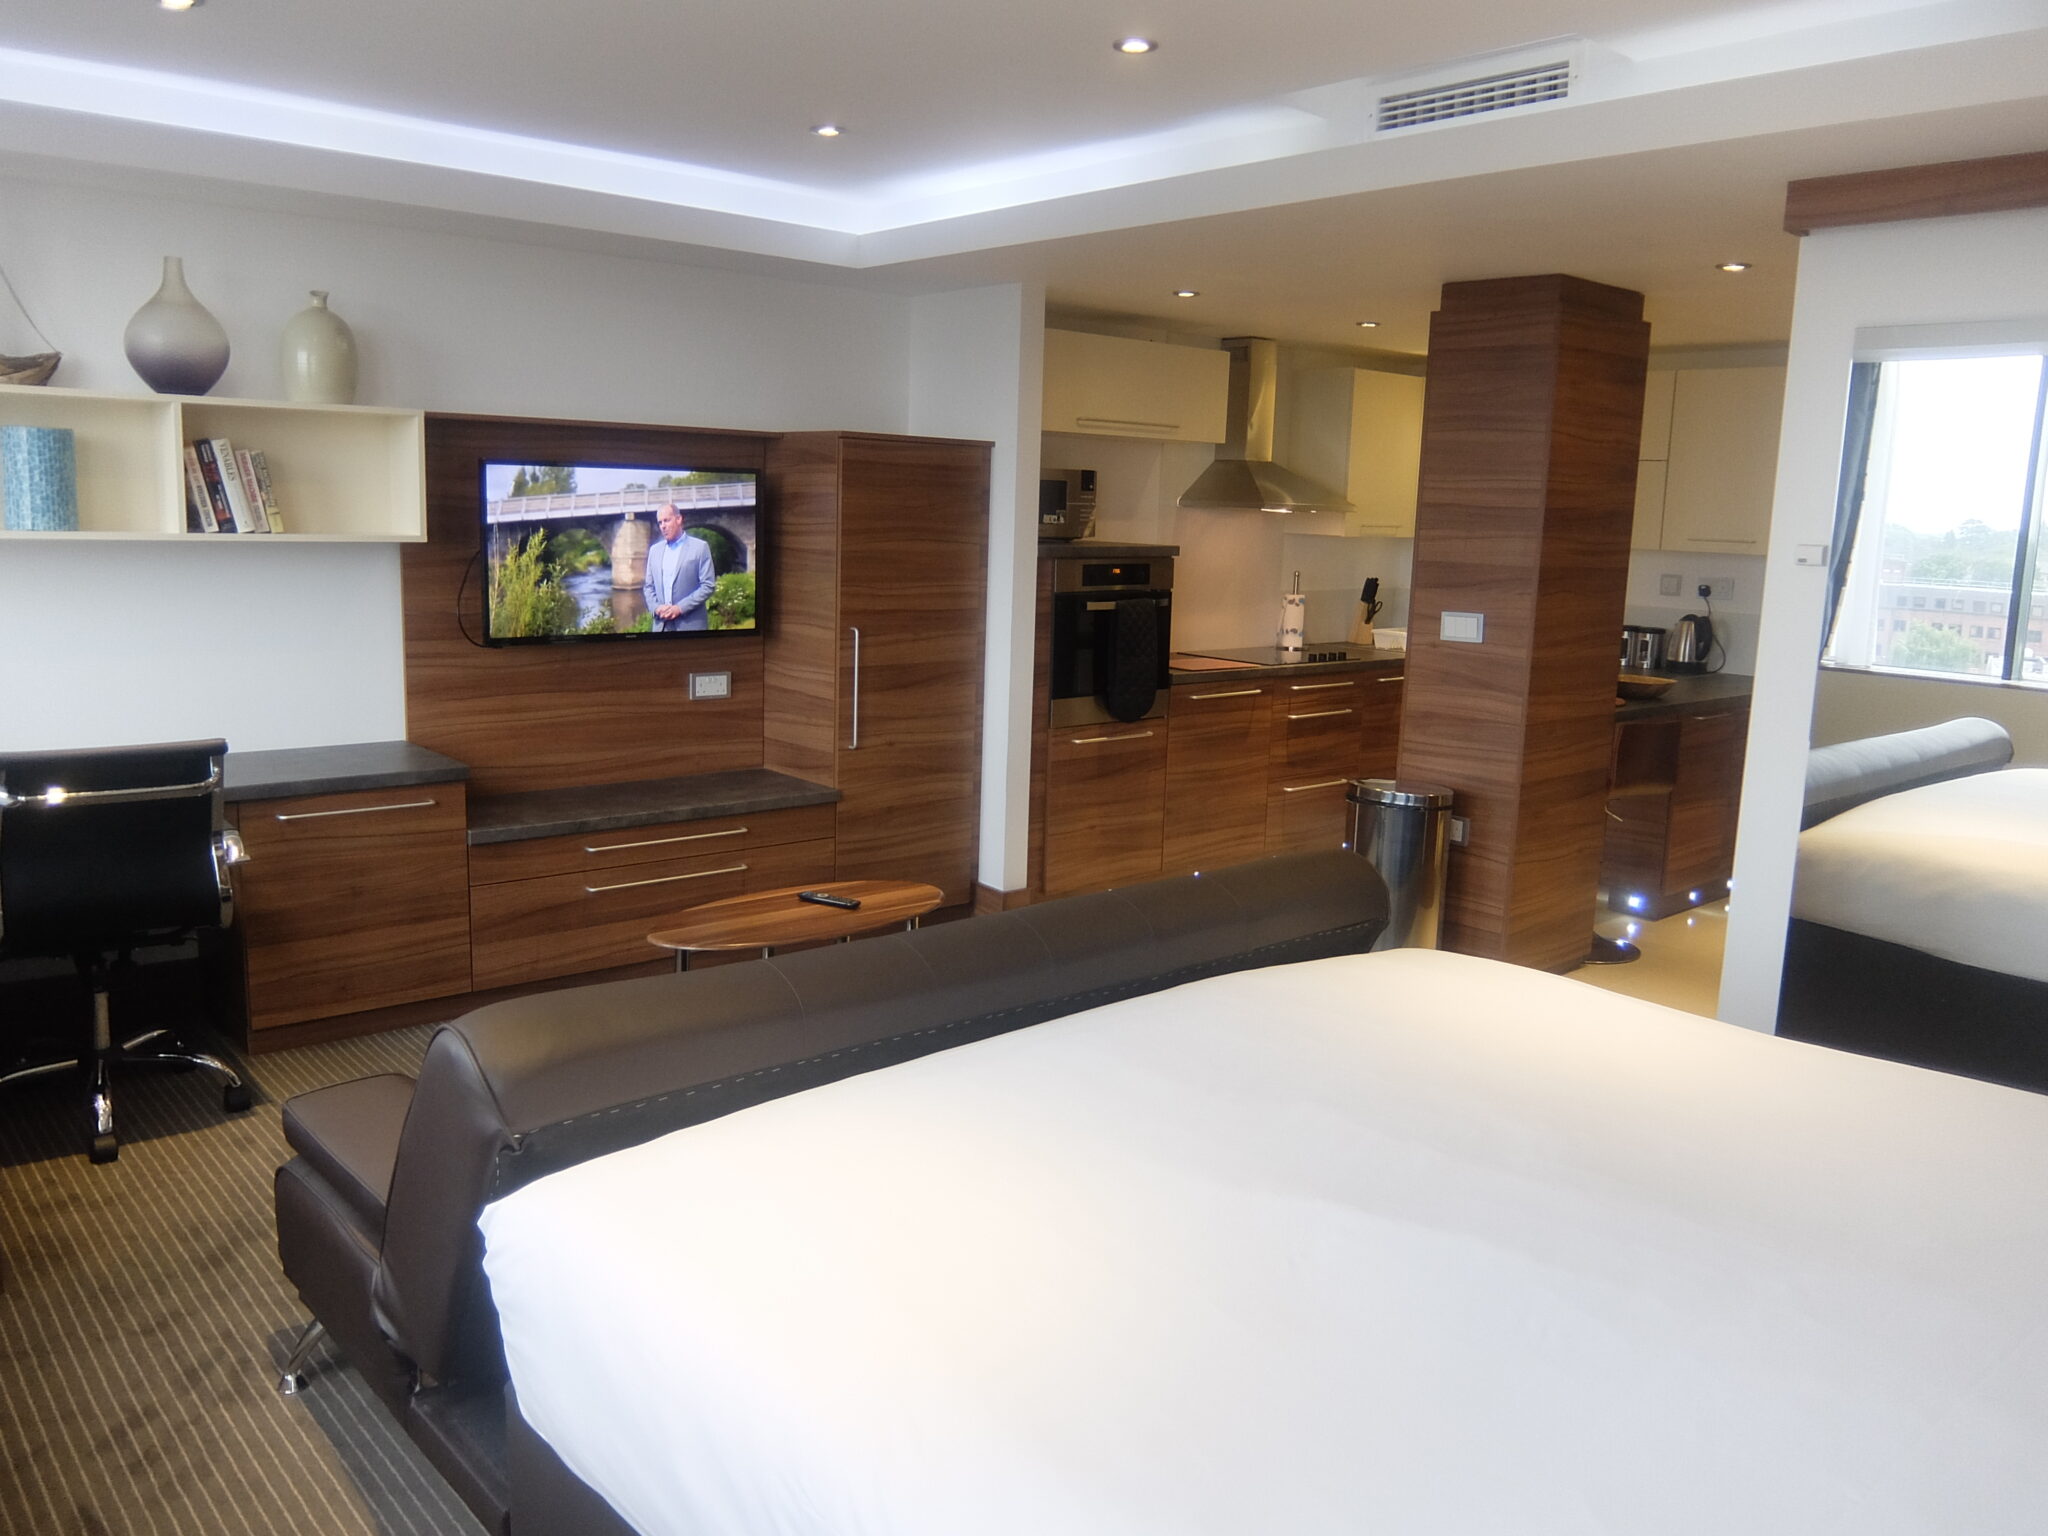 College Road Harrow Apartments - West London Serviced Apartments - Watford | Urban Stay